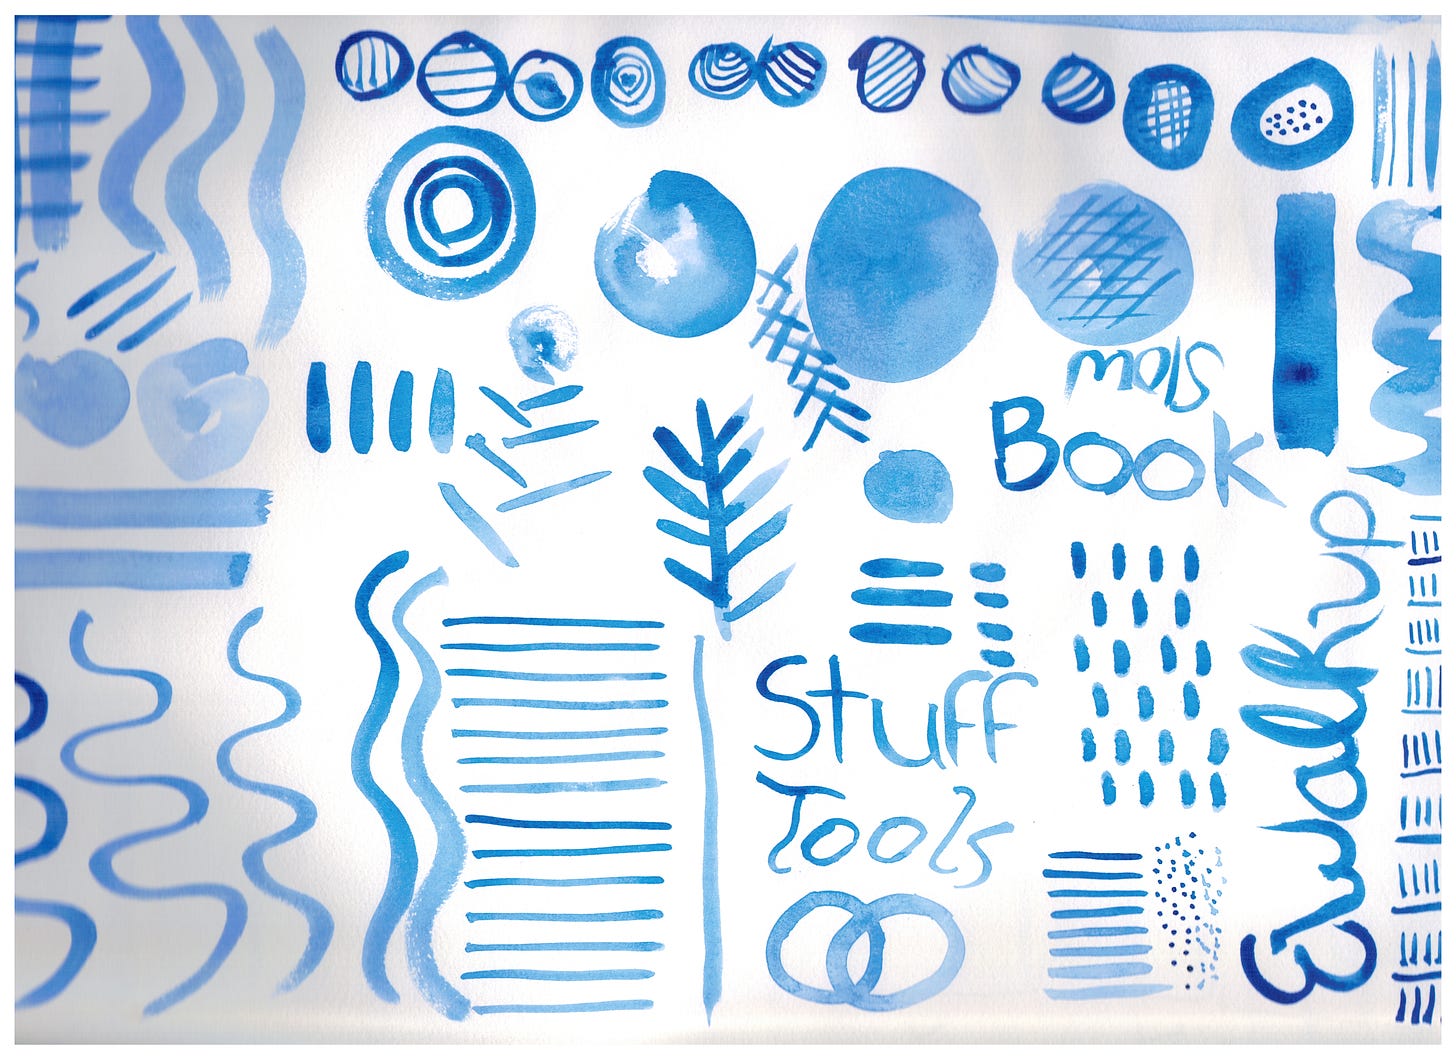 Watercolor brush strokes: lines, squiggles, circles in blue